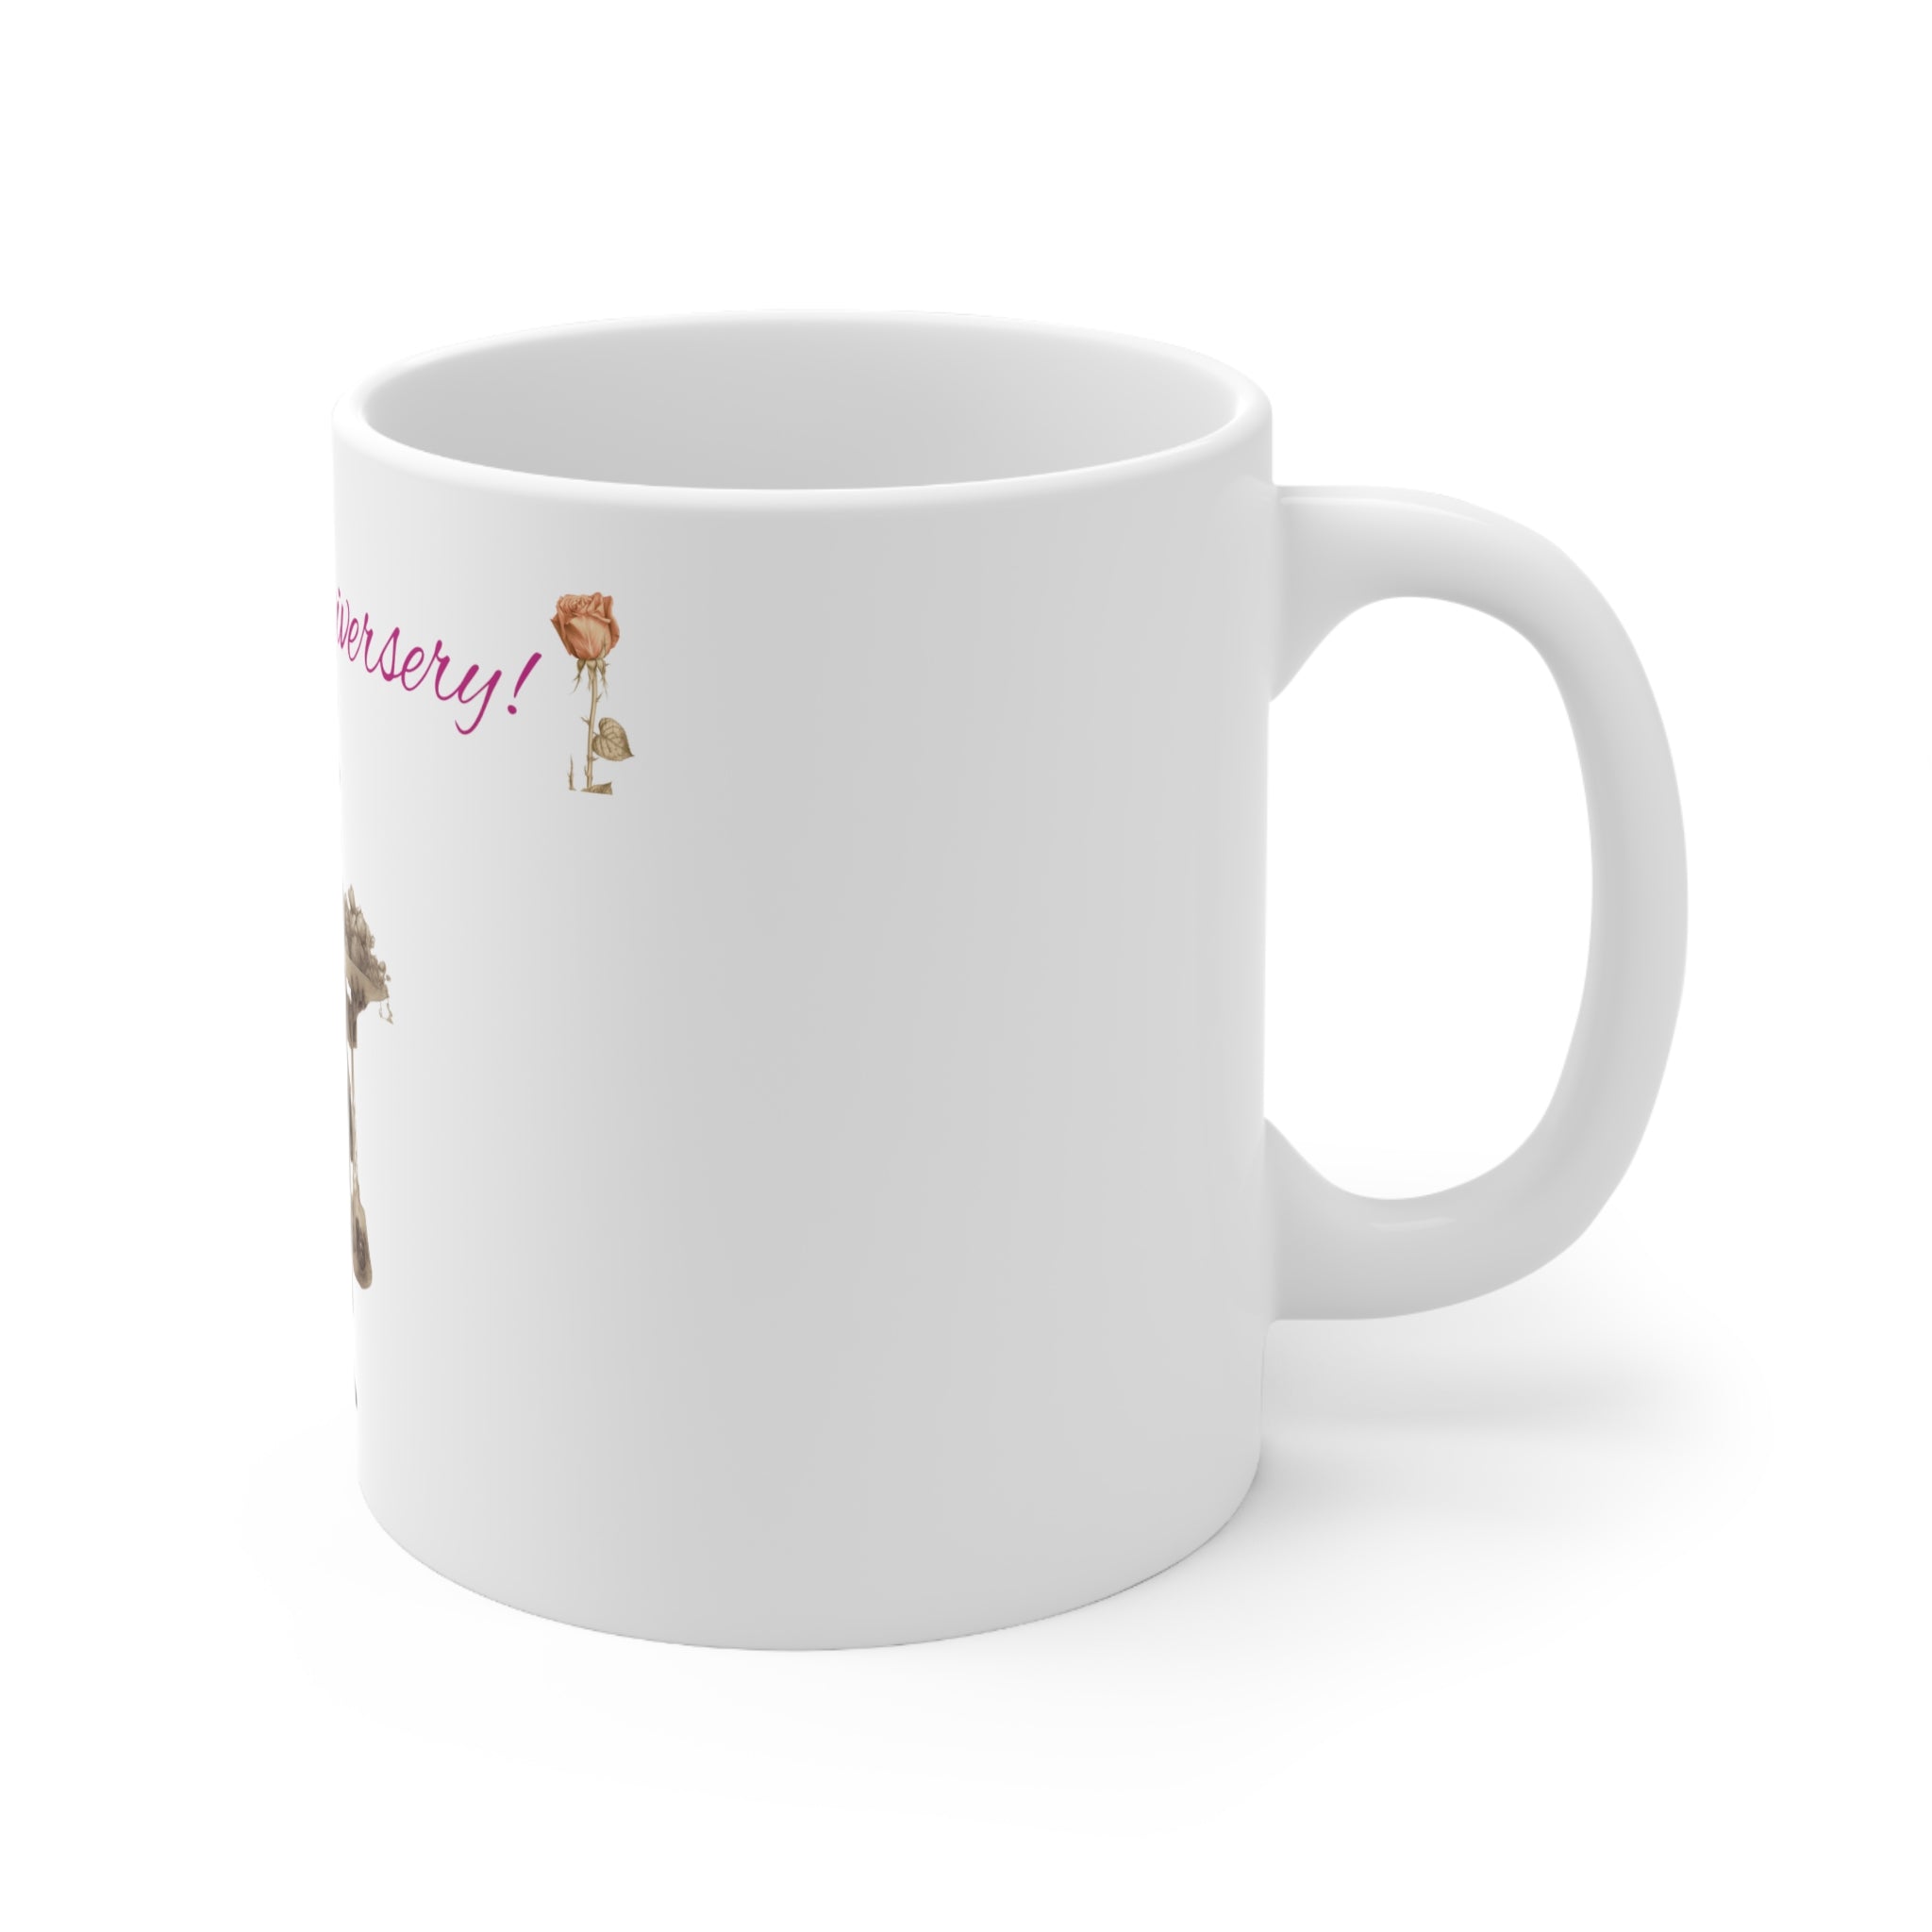 11-ounce size Coffee Mug Dog in Housecoat: Playboy Wealthy Dog Baskets - Happy Anniversary Gift - Ideal for "Cawfee Lovers" who frequent Starbucks - Unique Home Decor